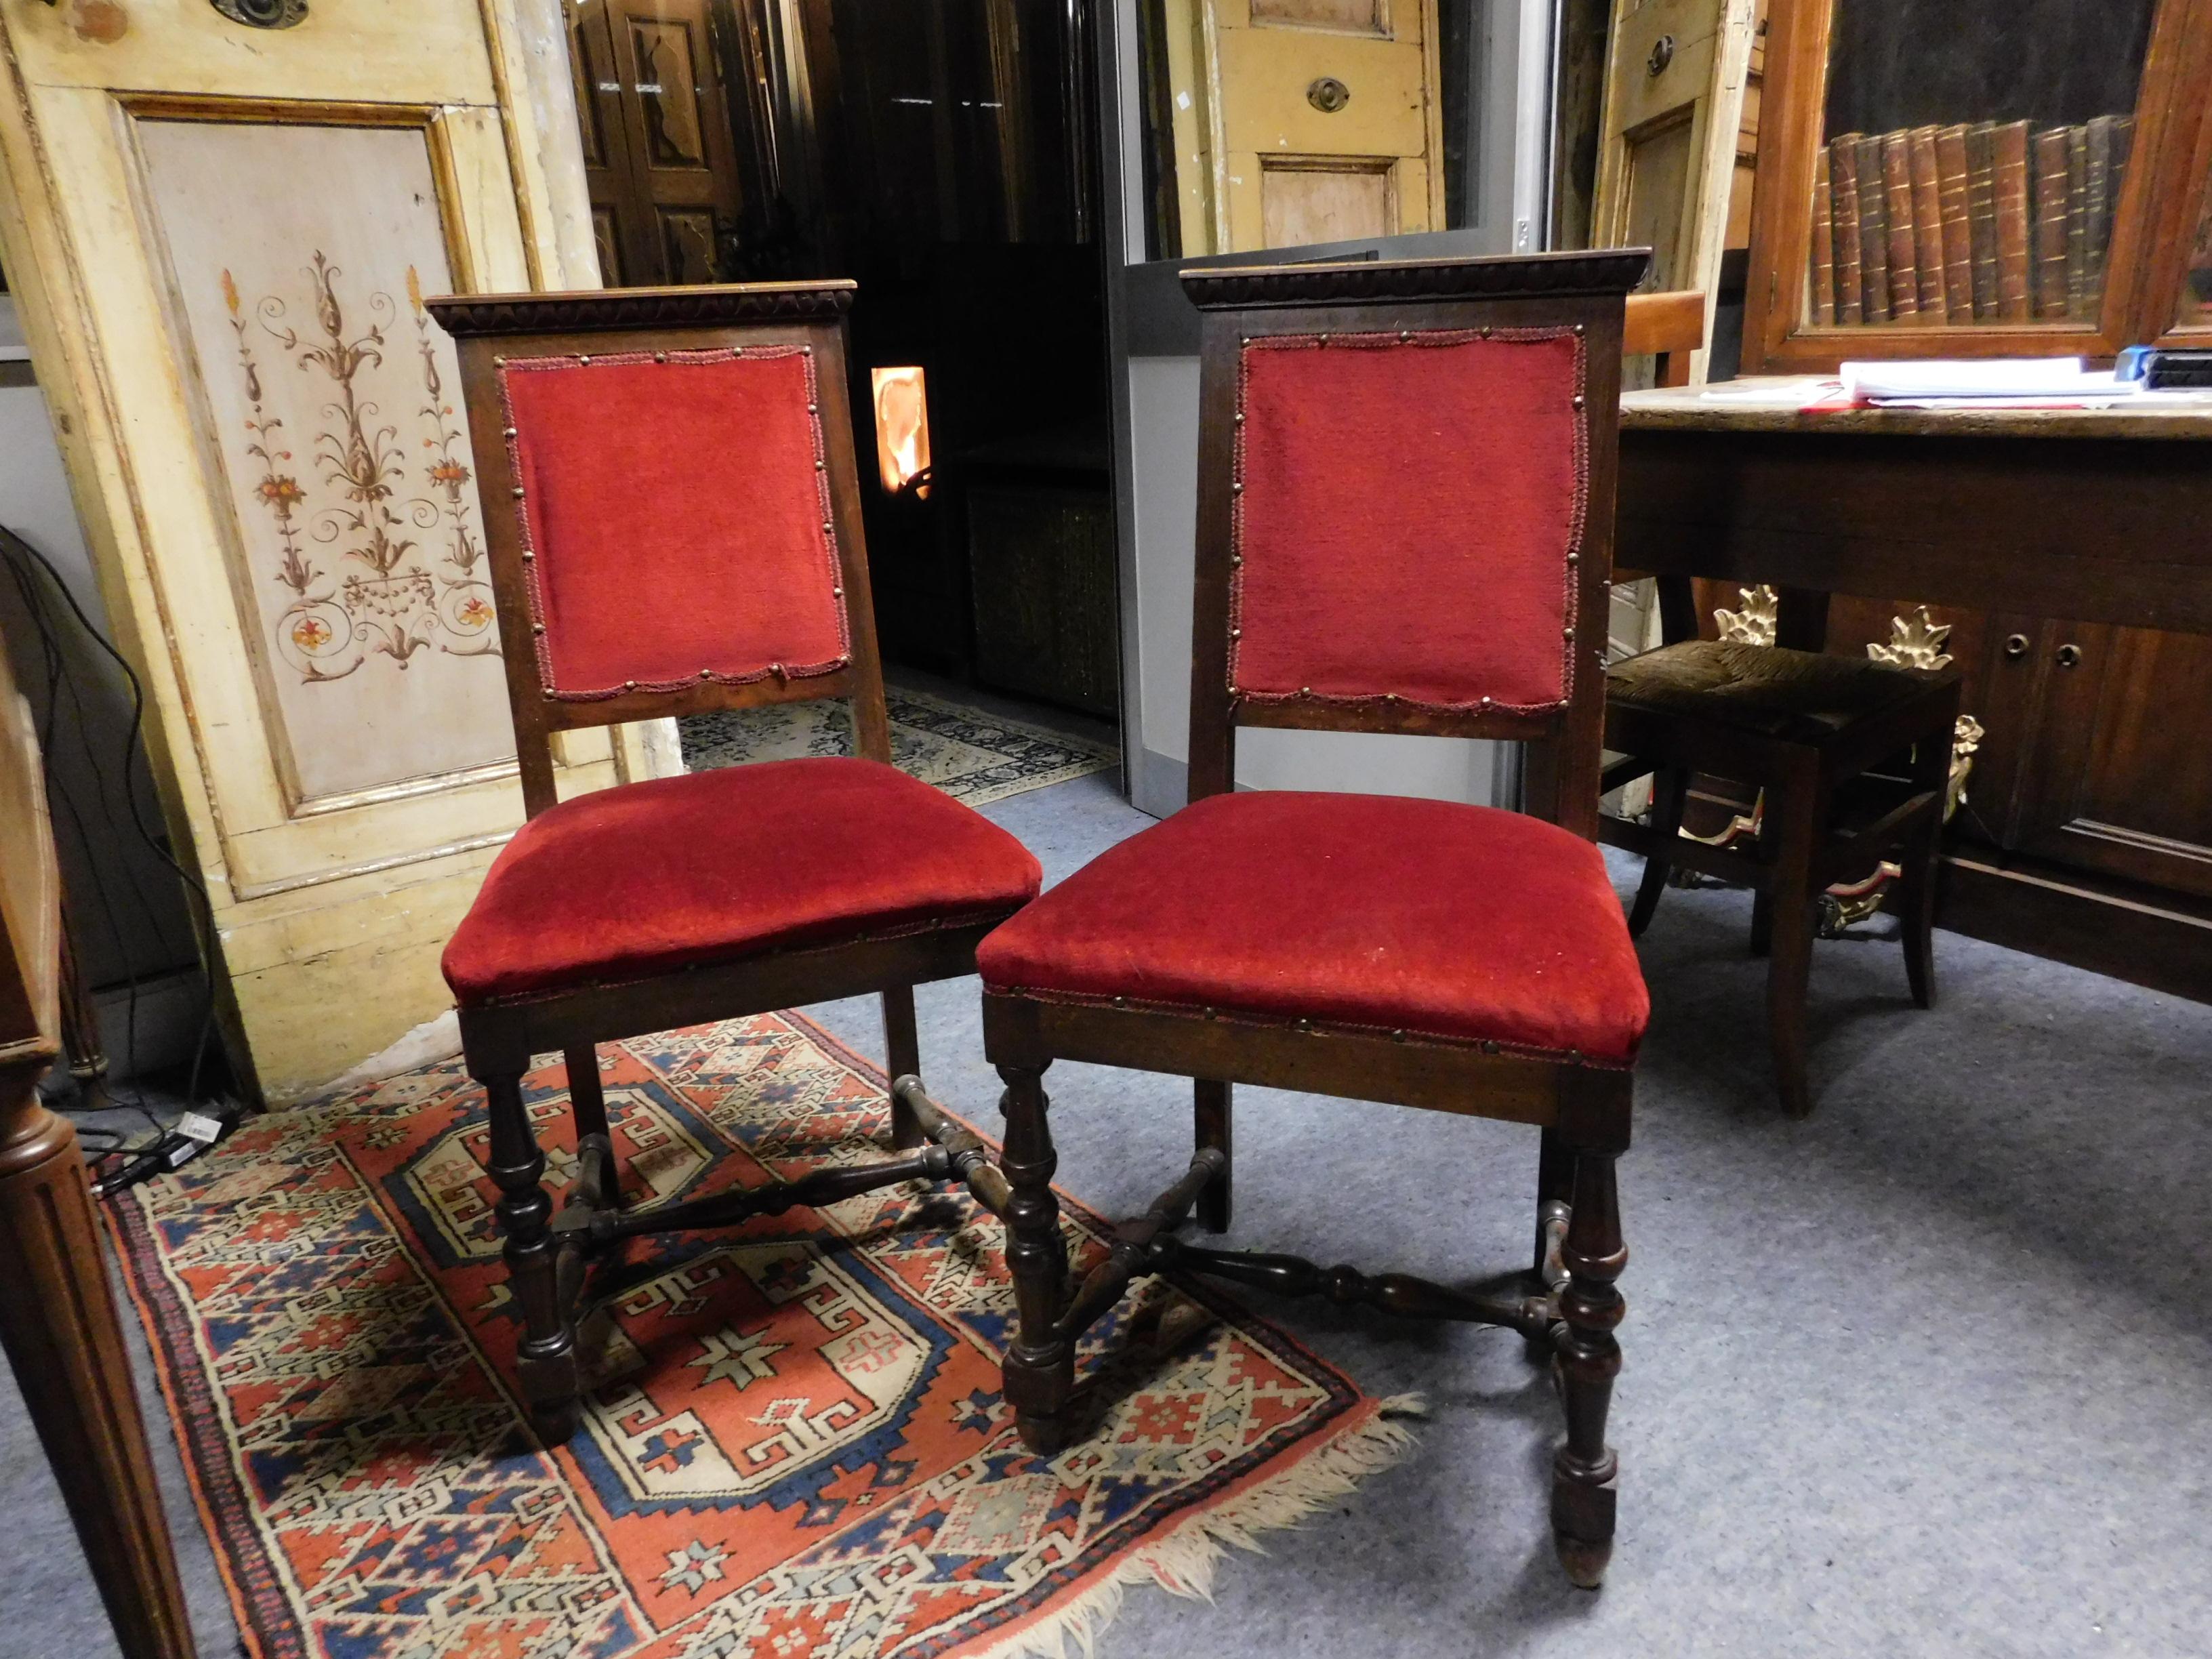 Antique pair of chairs, also used as armchairs, lined with red velvet, wooden frame with carved frames, new and perfect fabric, beautiful and very comfortable, wraparound seat to embellish an ornate living room or table.